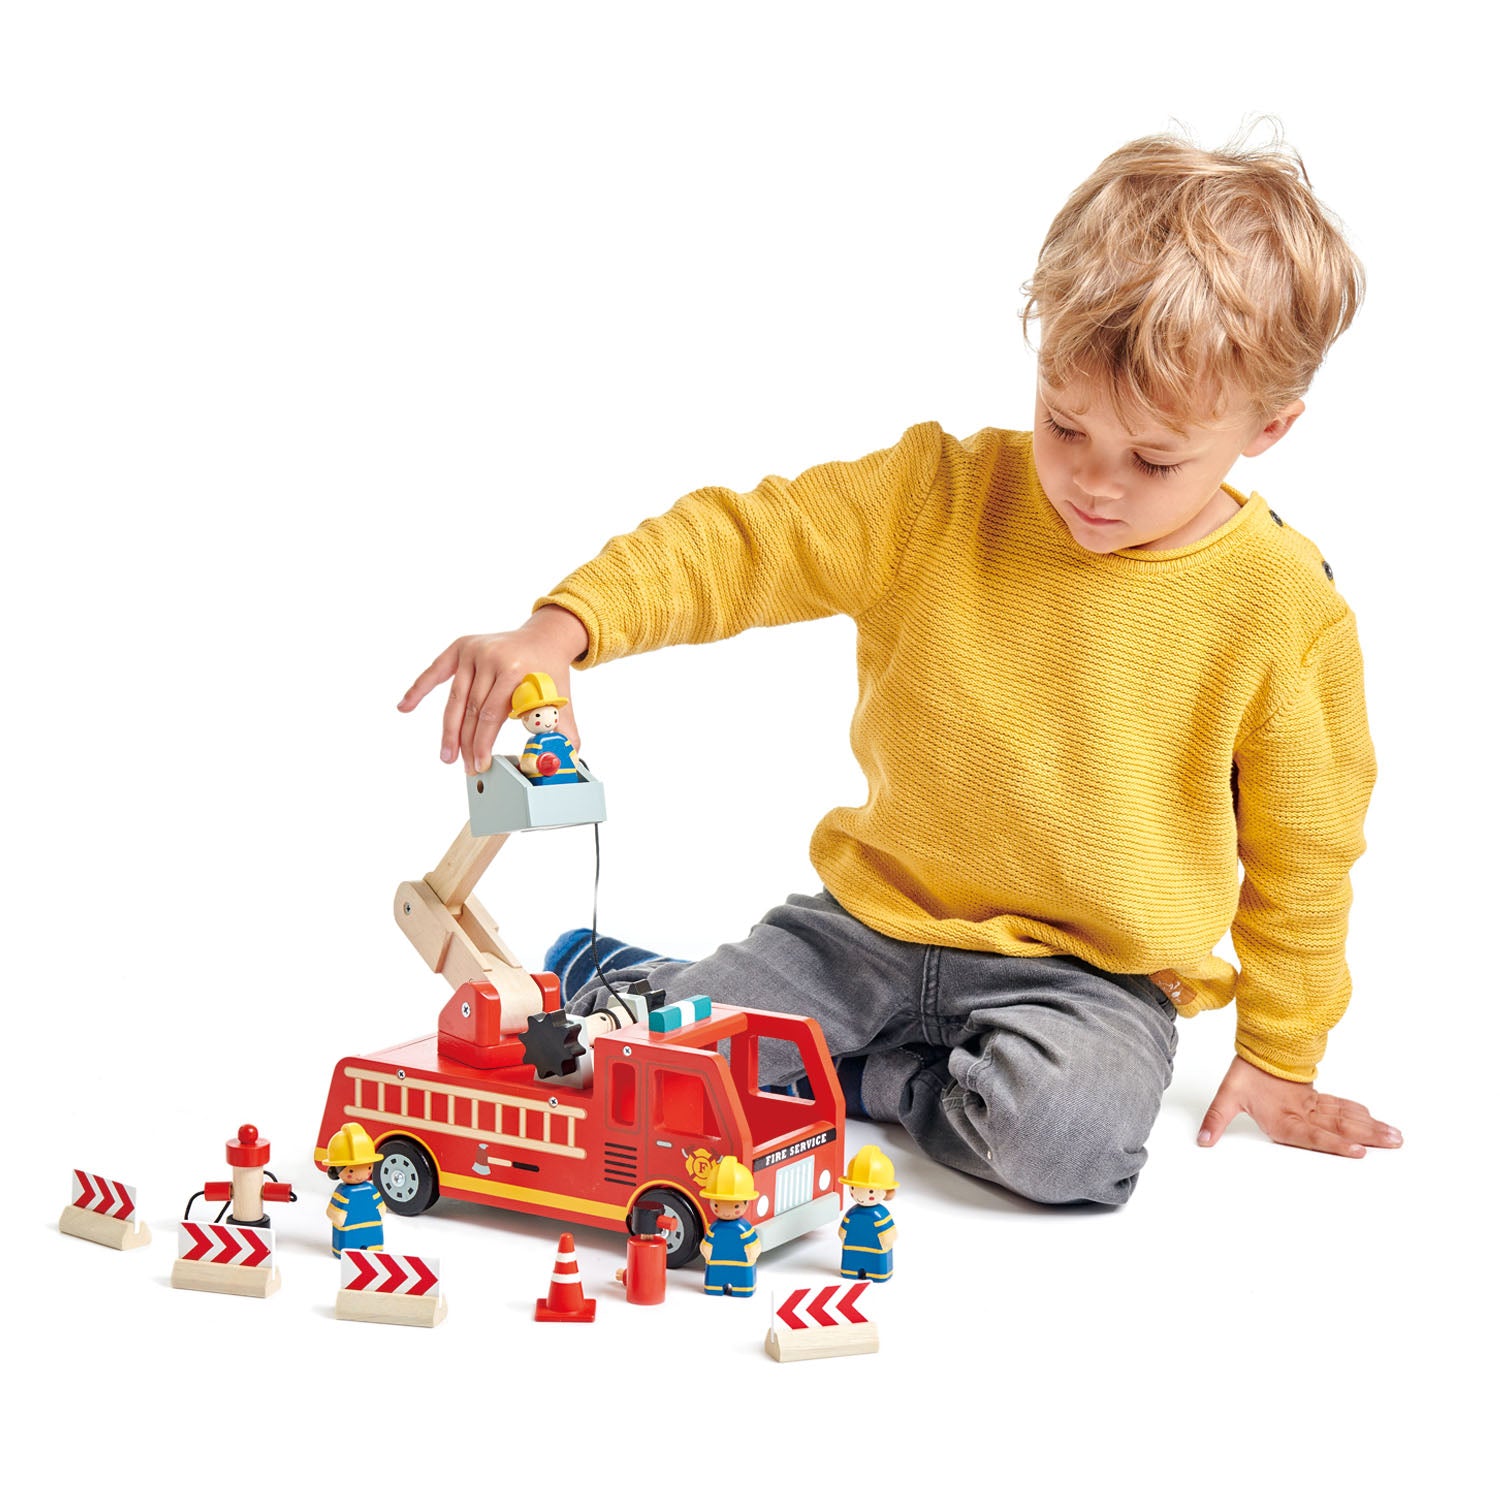 Boy playing with wooden fire engine set